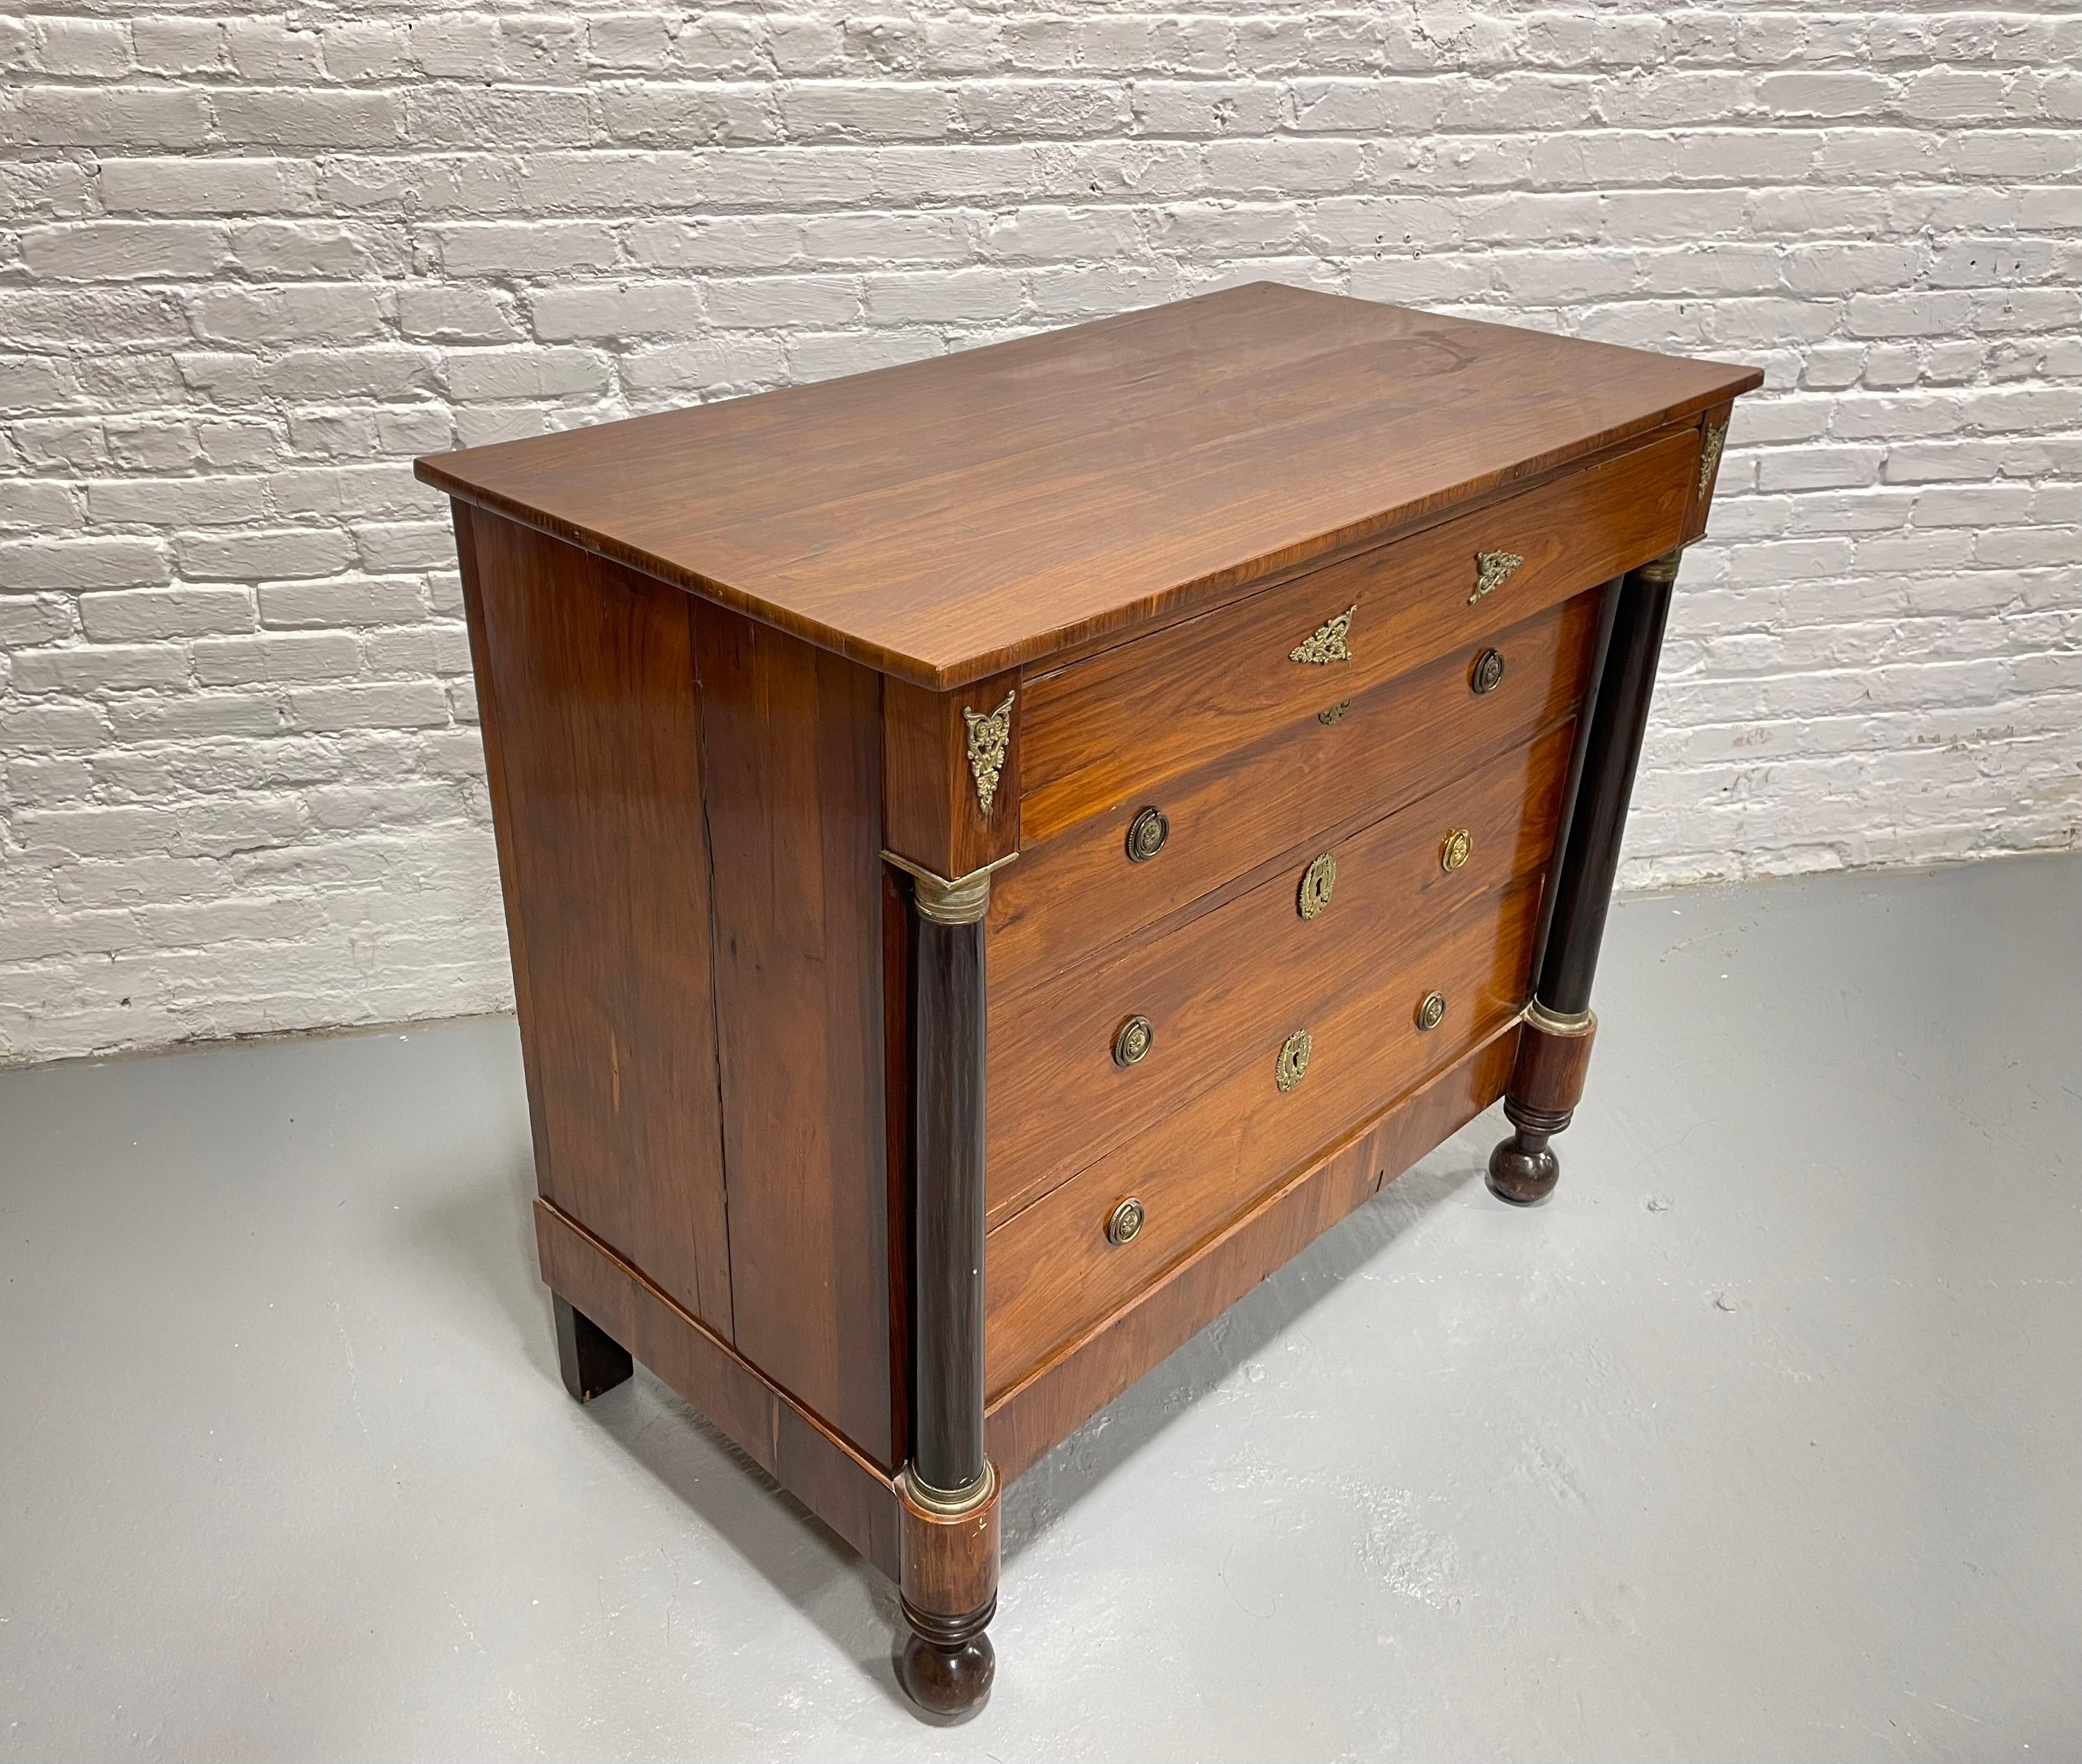 French First Empire Period Chest of Drawers / Commode / Dresser, c. 1810 For Sale 1